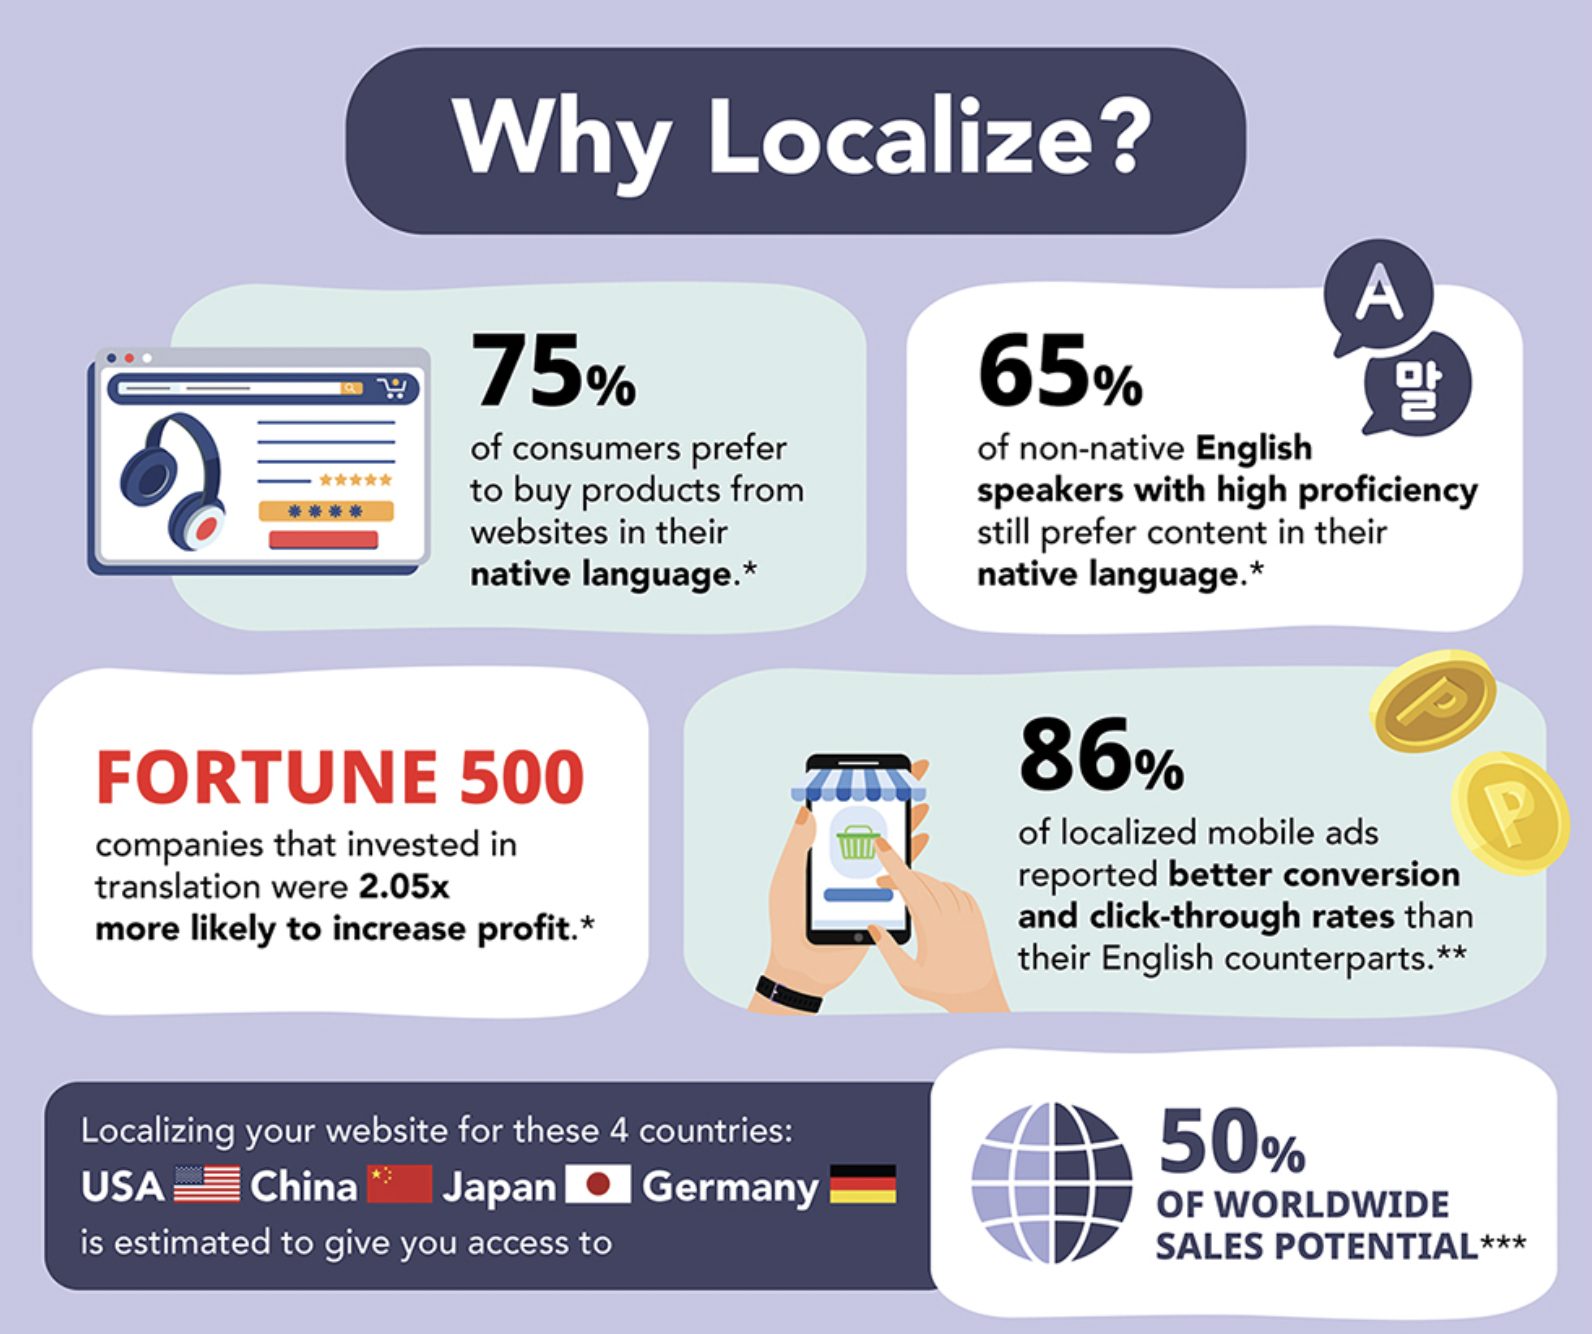 Localization can increase website traffic by up to 30%